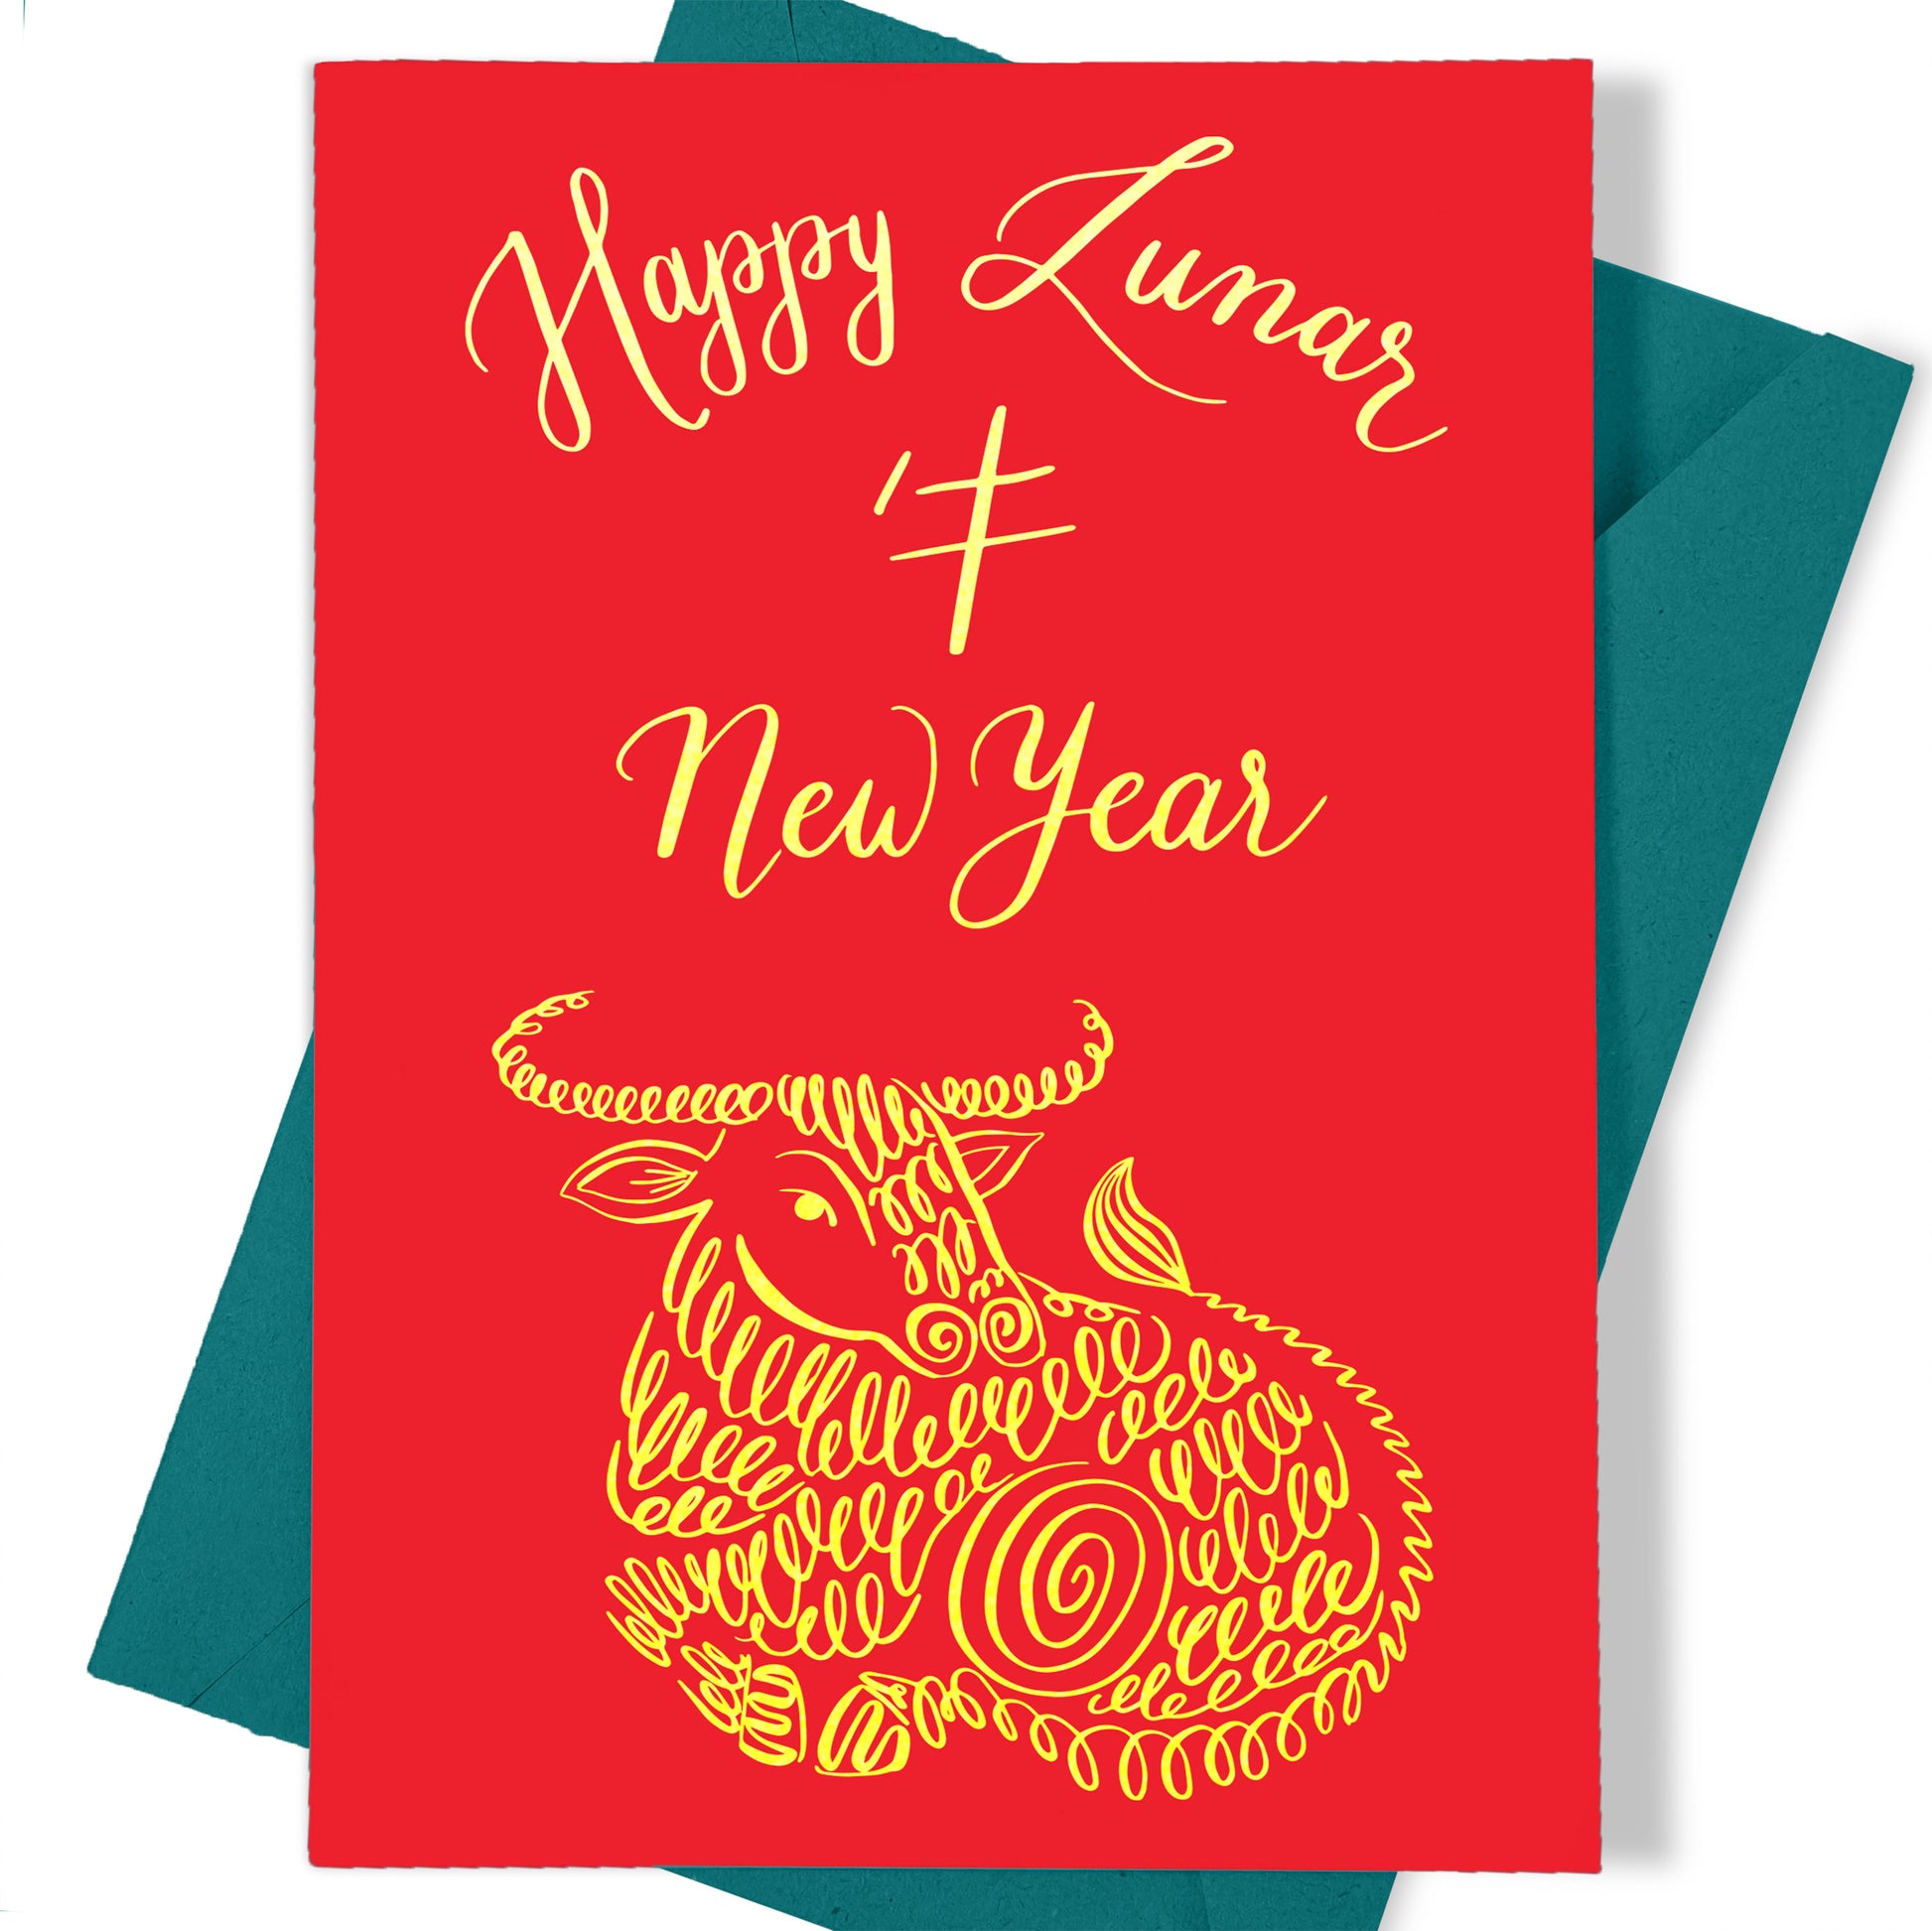 A thumbnail view of the greeting card: "Happy Lunar New Year"